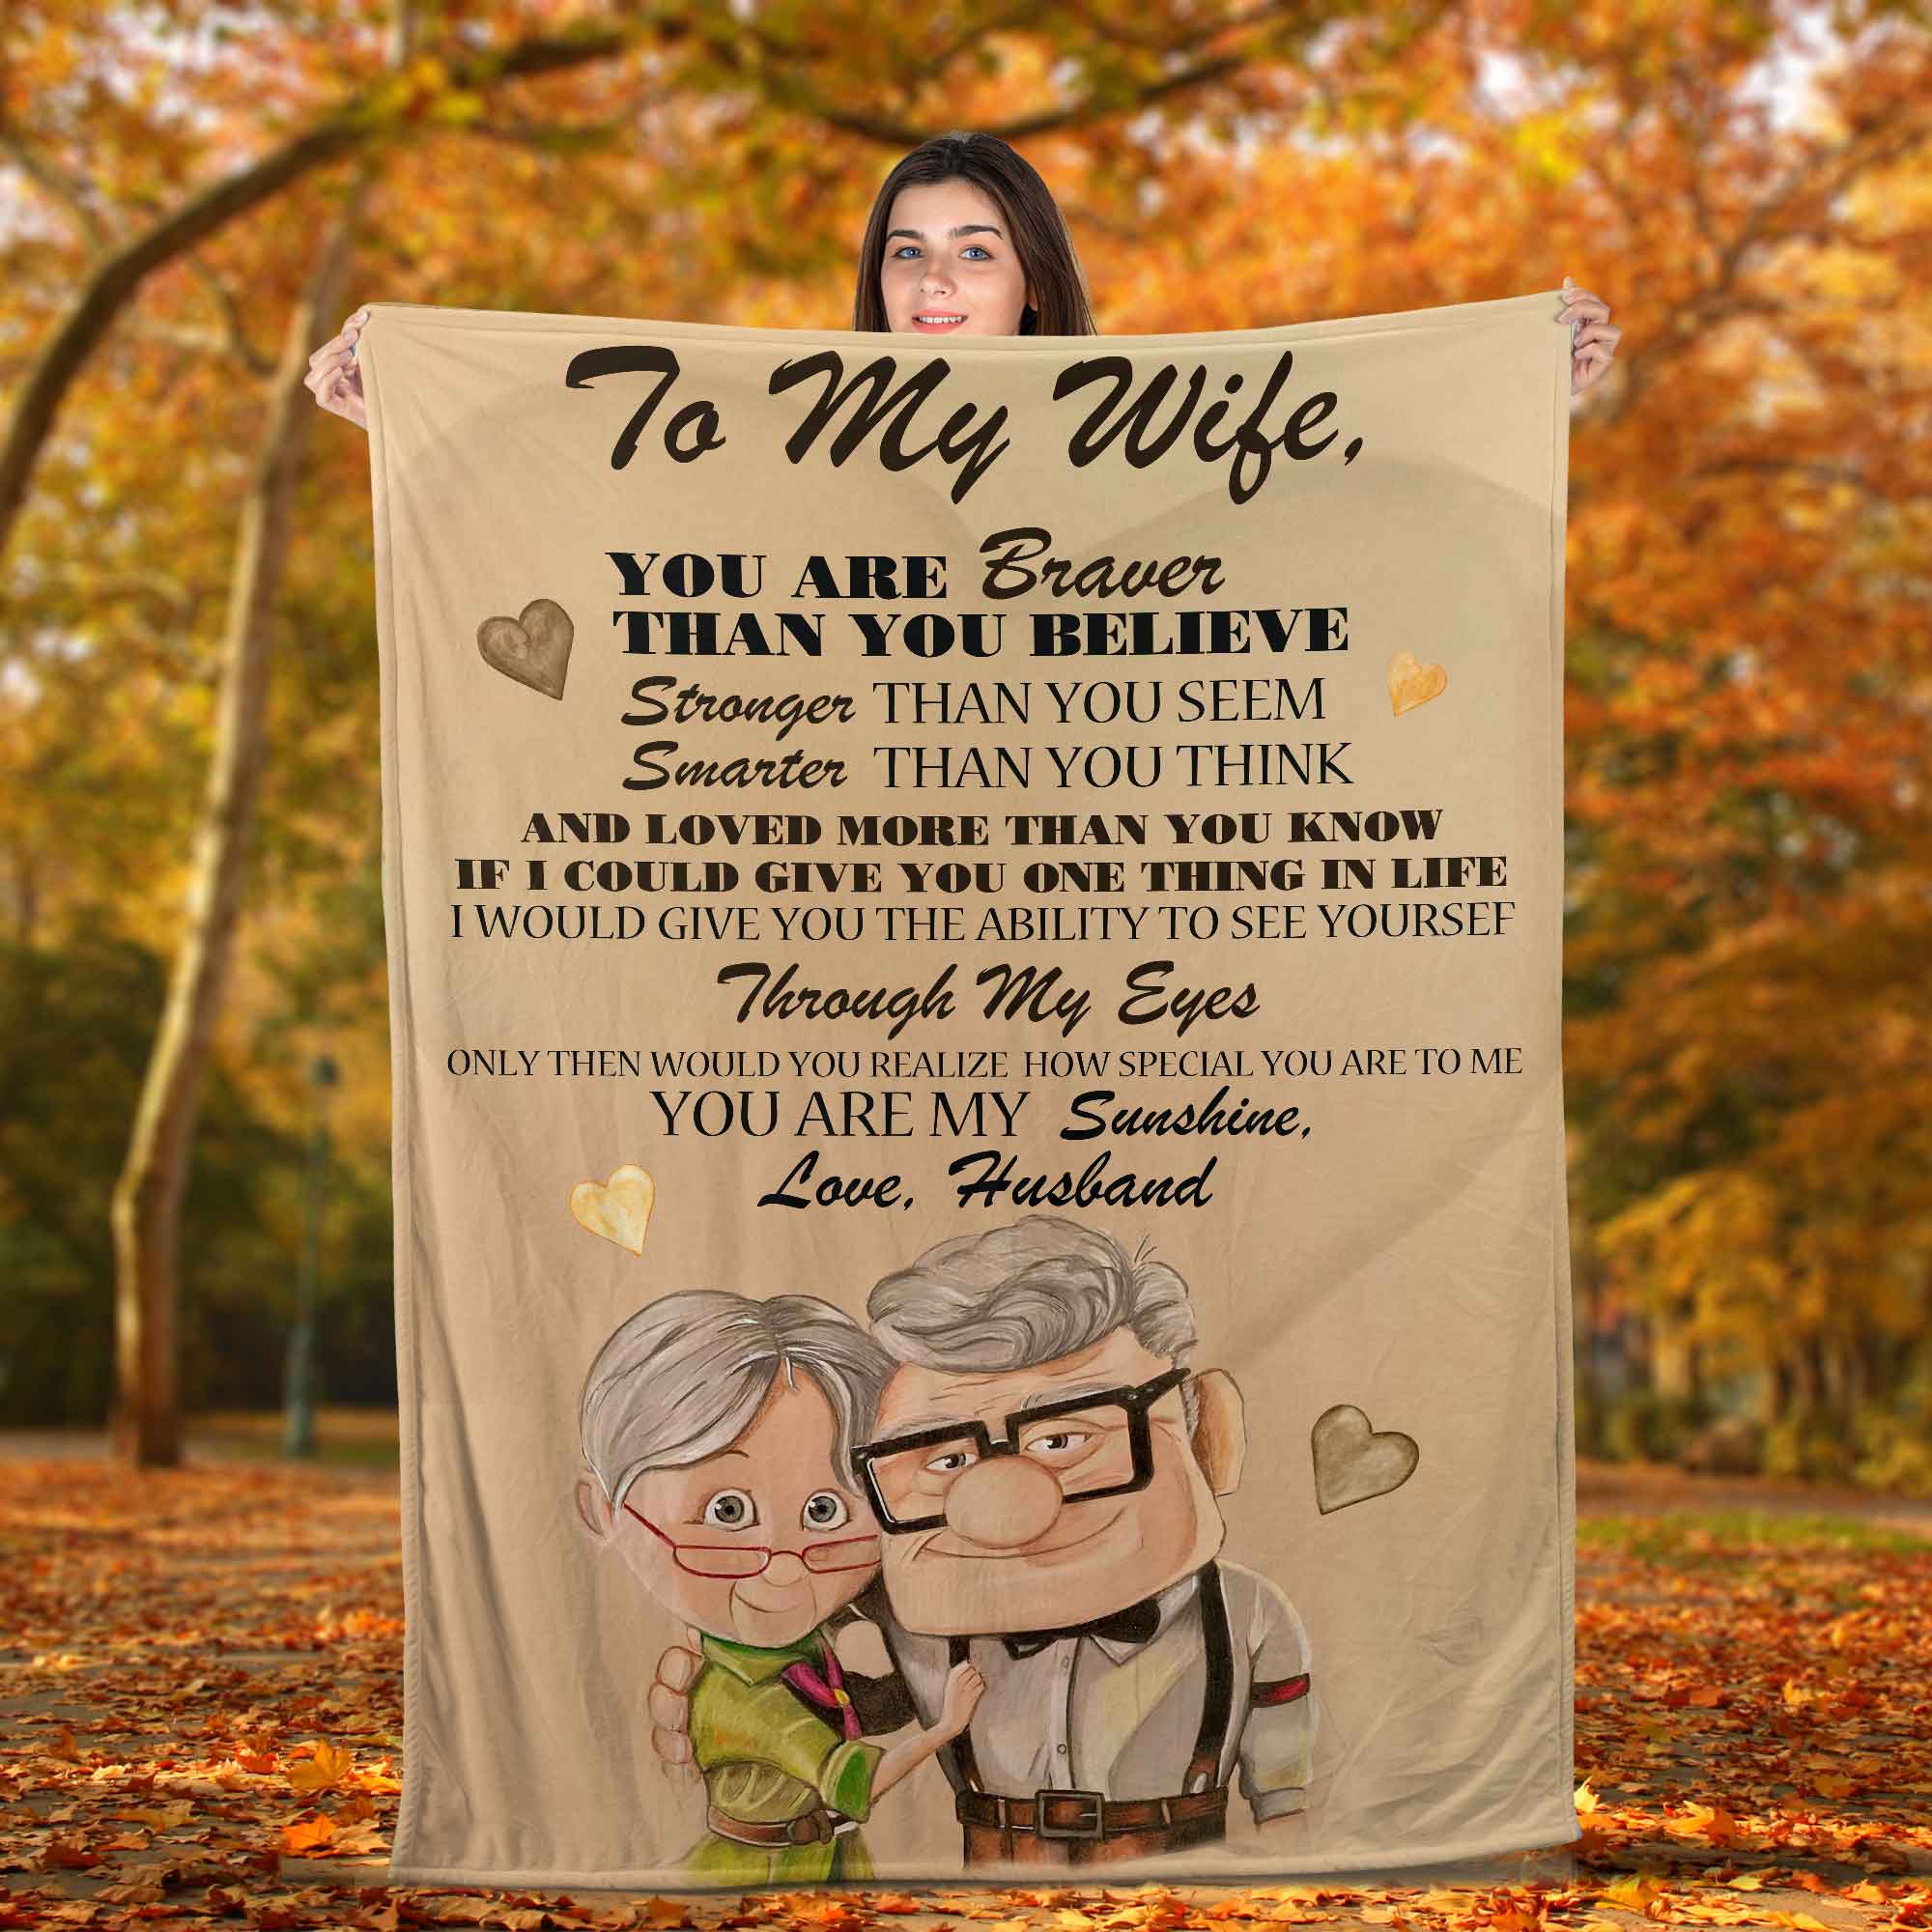 Skitongifts Blanket For Sofa Throws, Bed Throws Blanket - To My Wife You Are Braver Than You Believe Stronger Than You Seem-TT1501